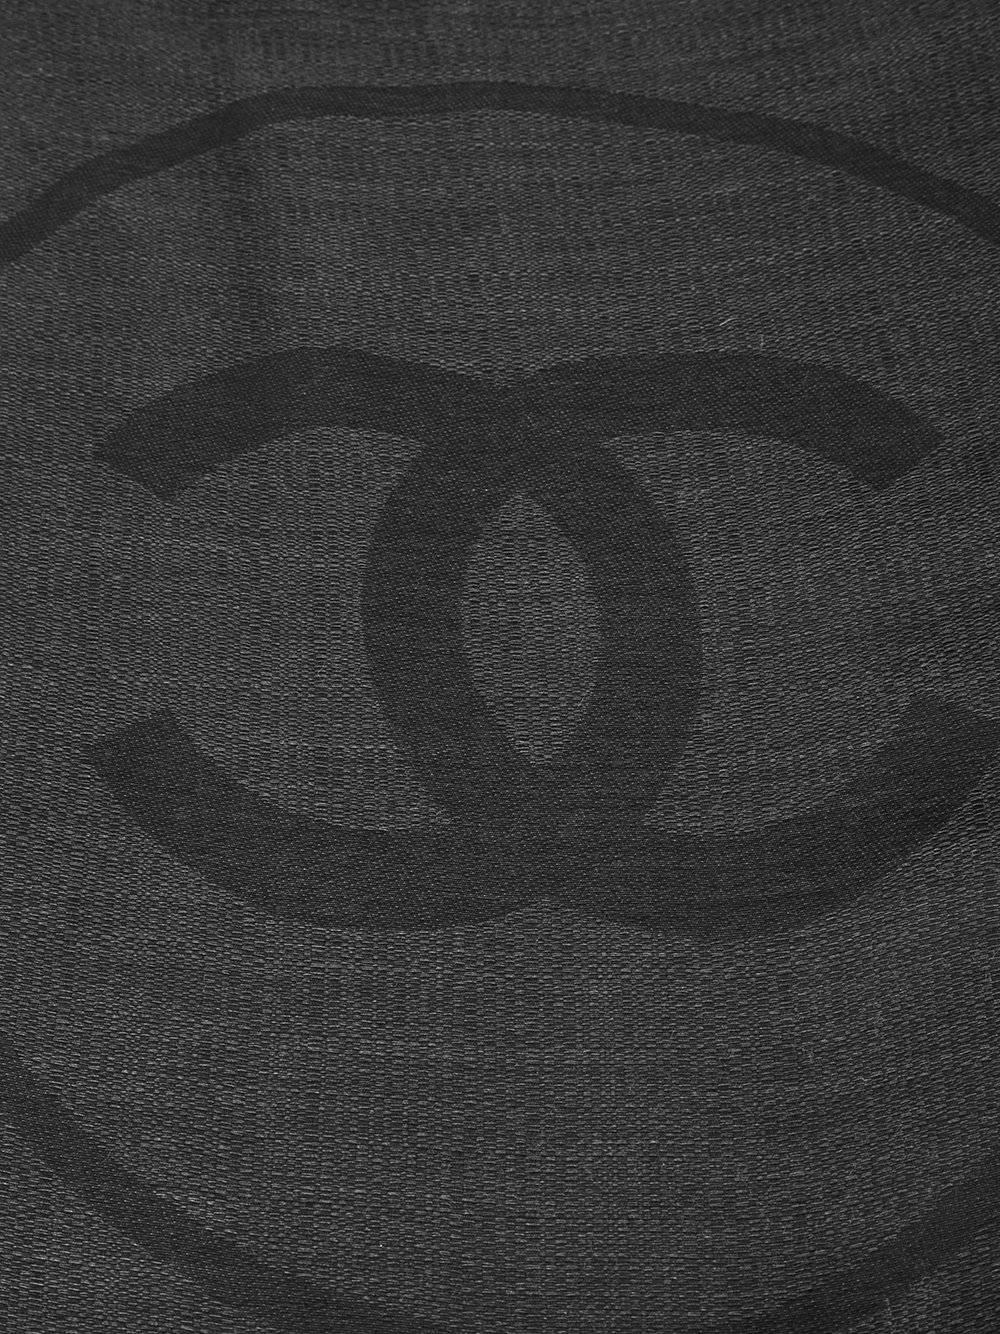 Elegant in its simplicity, this Chanel scarf is spun from a silk-cashmere blend. Featuring a translucent silk border, framing a black panel embossed with the Chanel monogram.

Colour: Black

Material: 70% Silk, 30% cashmere

Measurements: Length: